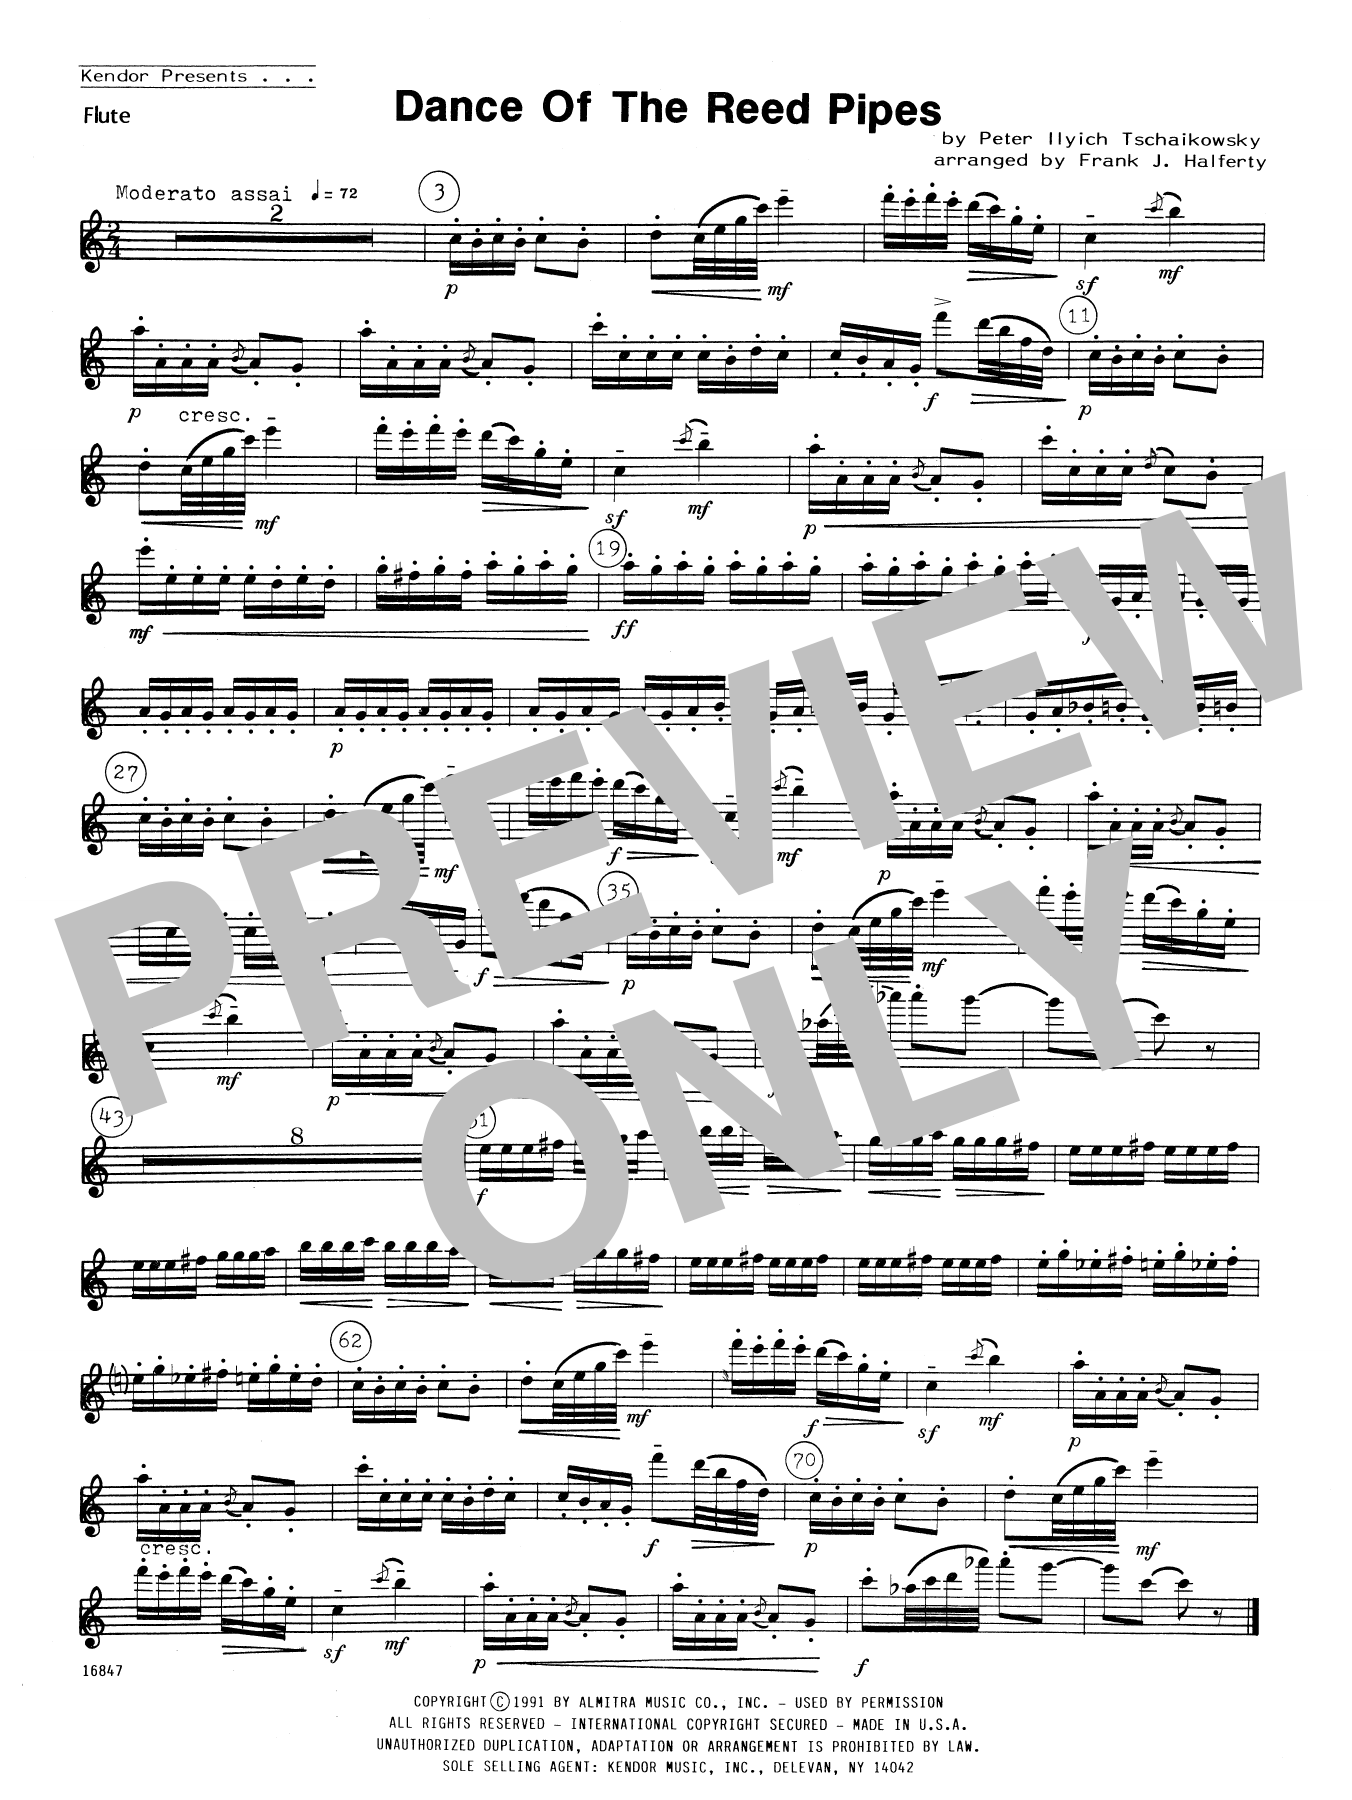 Download Frank J. Halferty Dance Of The Reed Pipes - Flute Sheet Music